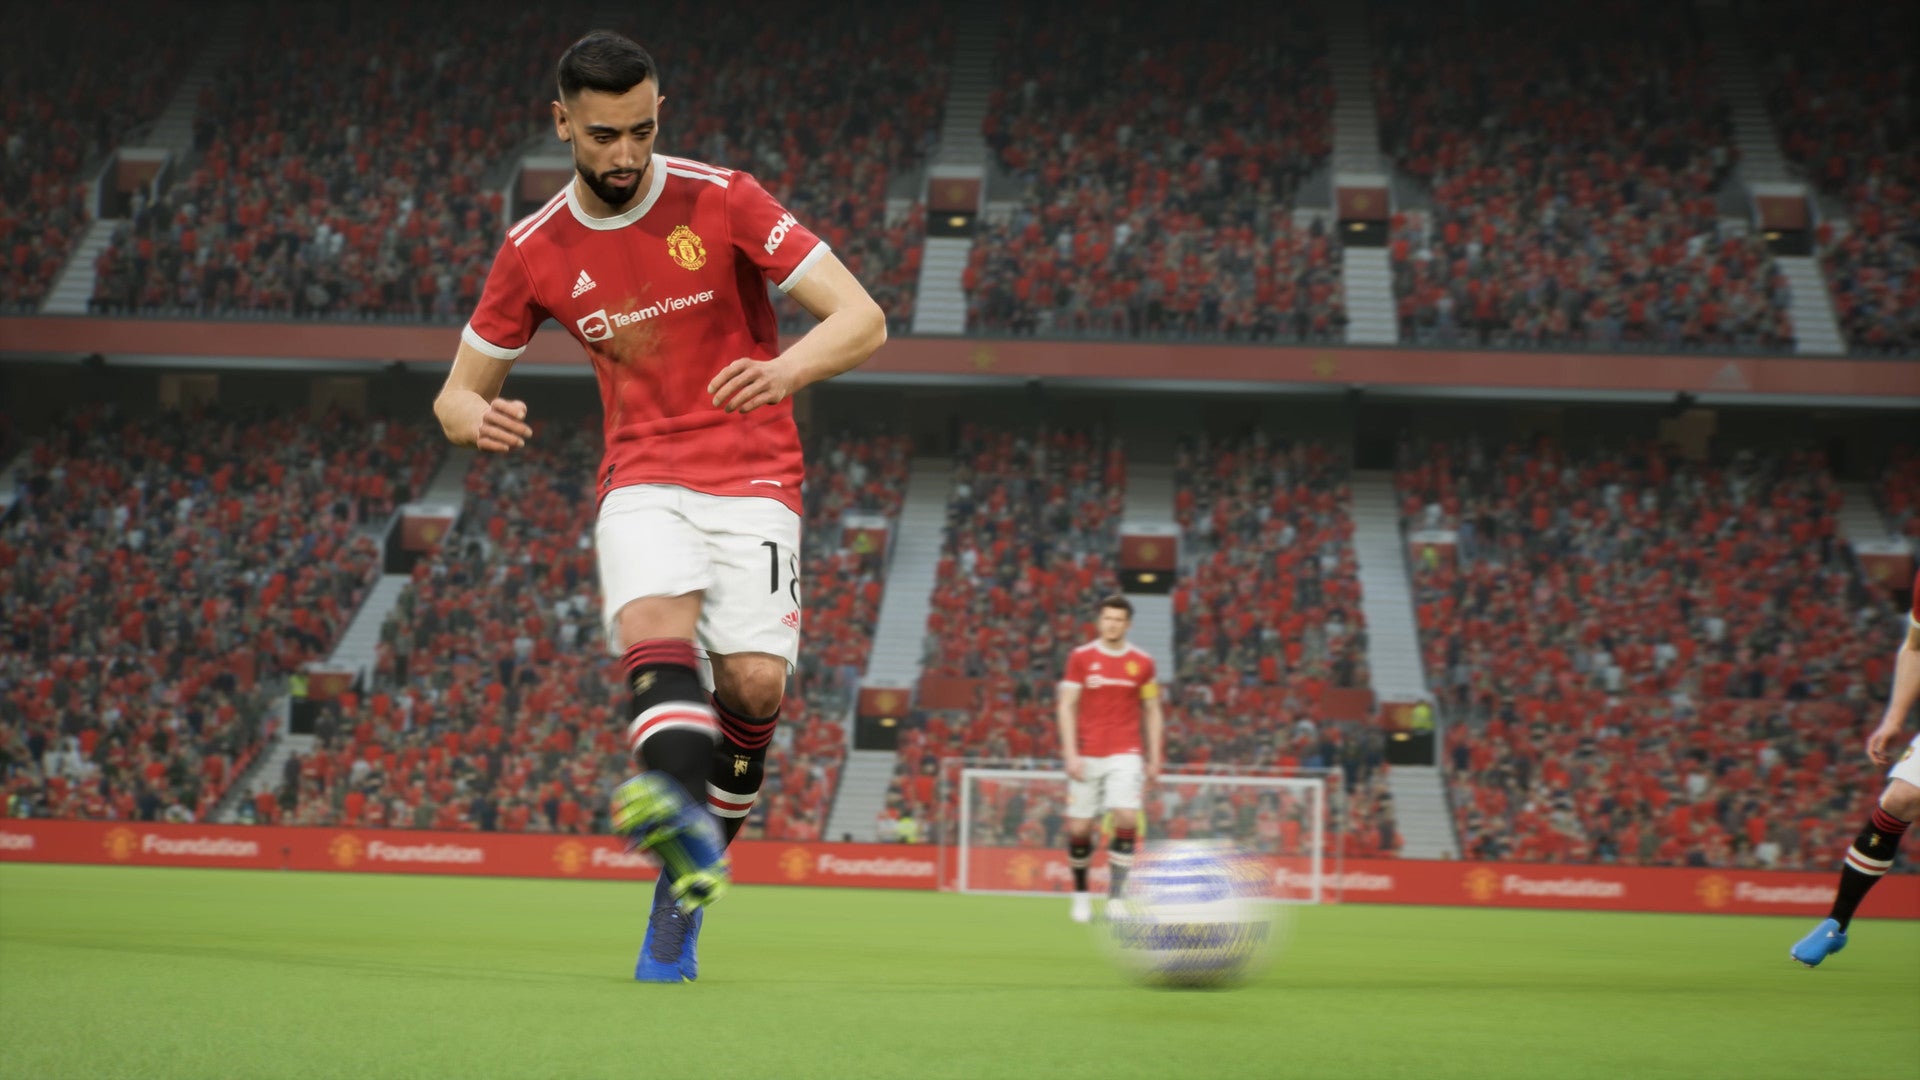 Image for eFootball's Master League will be paid content available in 2023